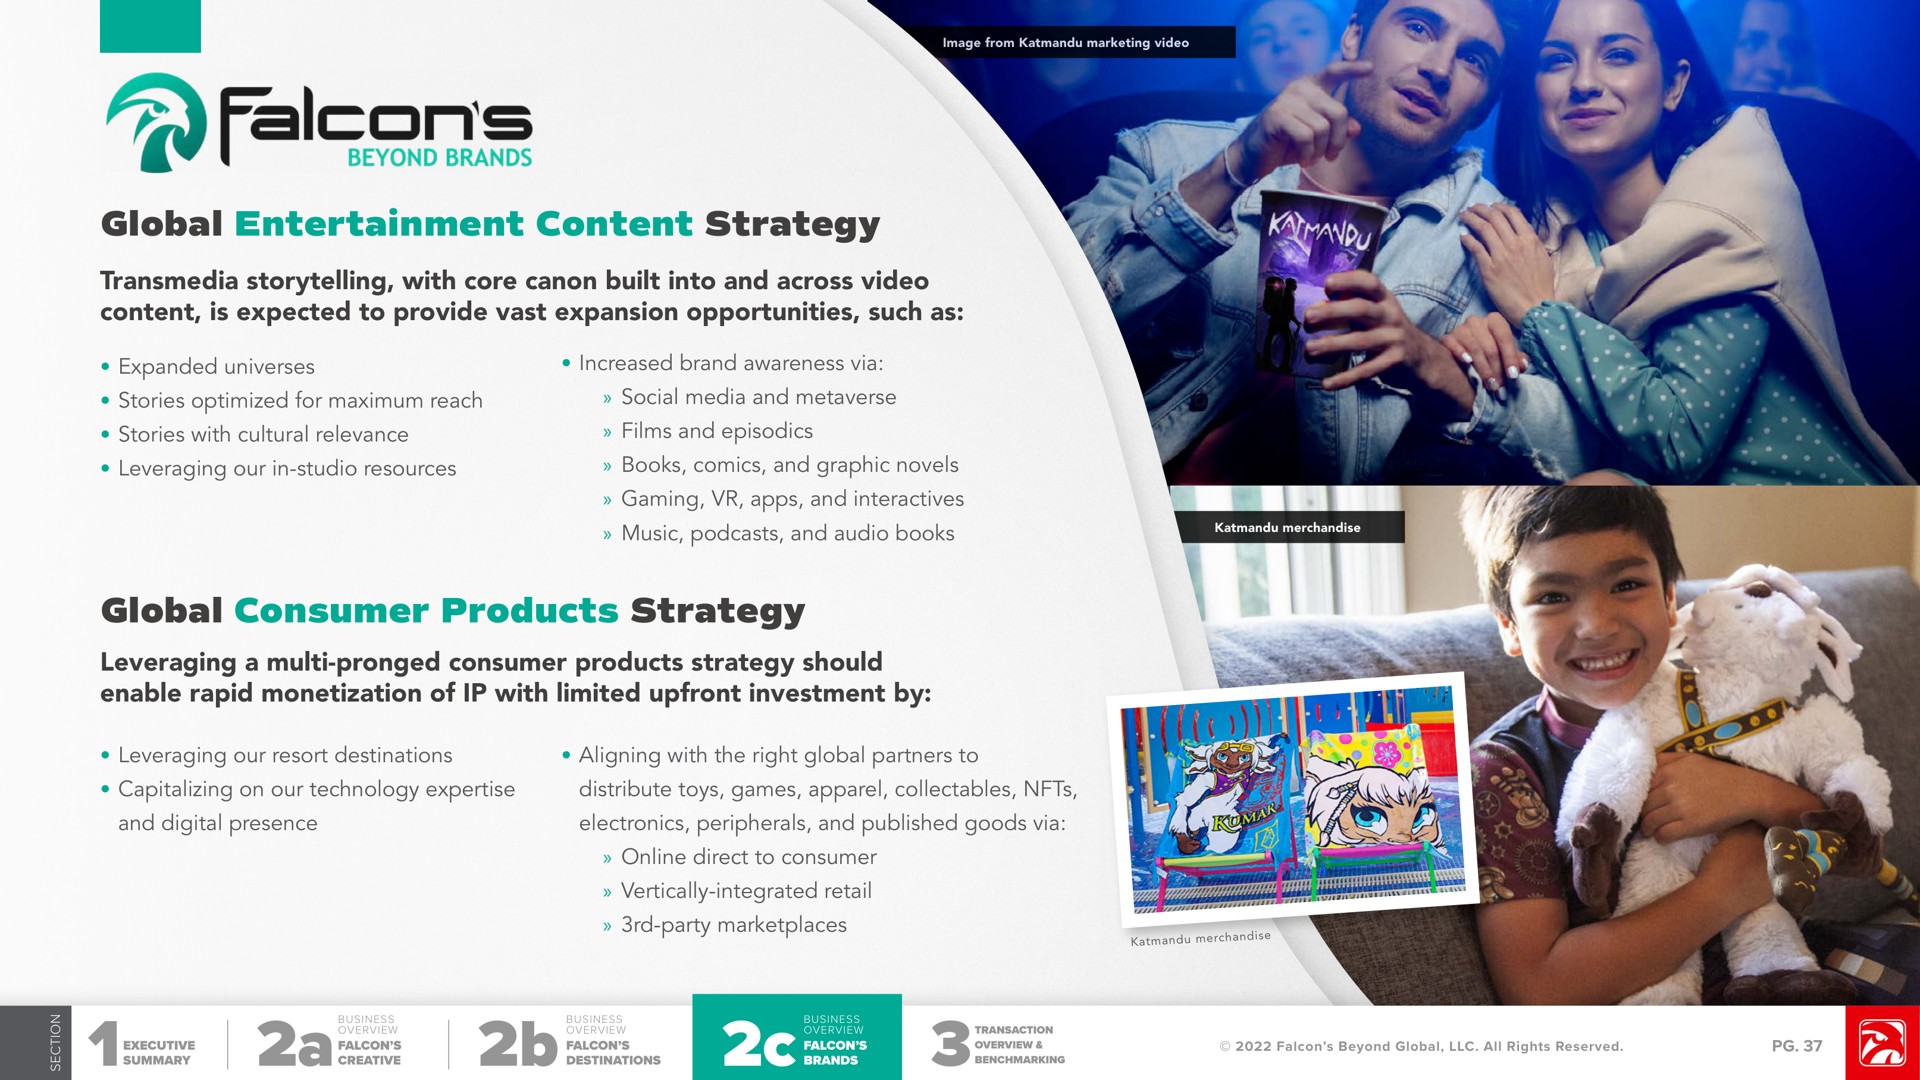 global entertainment content strategy storytelling with core canon built into and across video content is expected to provide vast expansion opportunities such as global consumer products strategy leveraging a pronged consumer products strategy should enable rapid monetization of with limited investment by | Falcon's Beyond